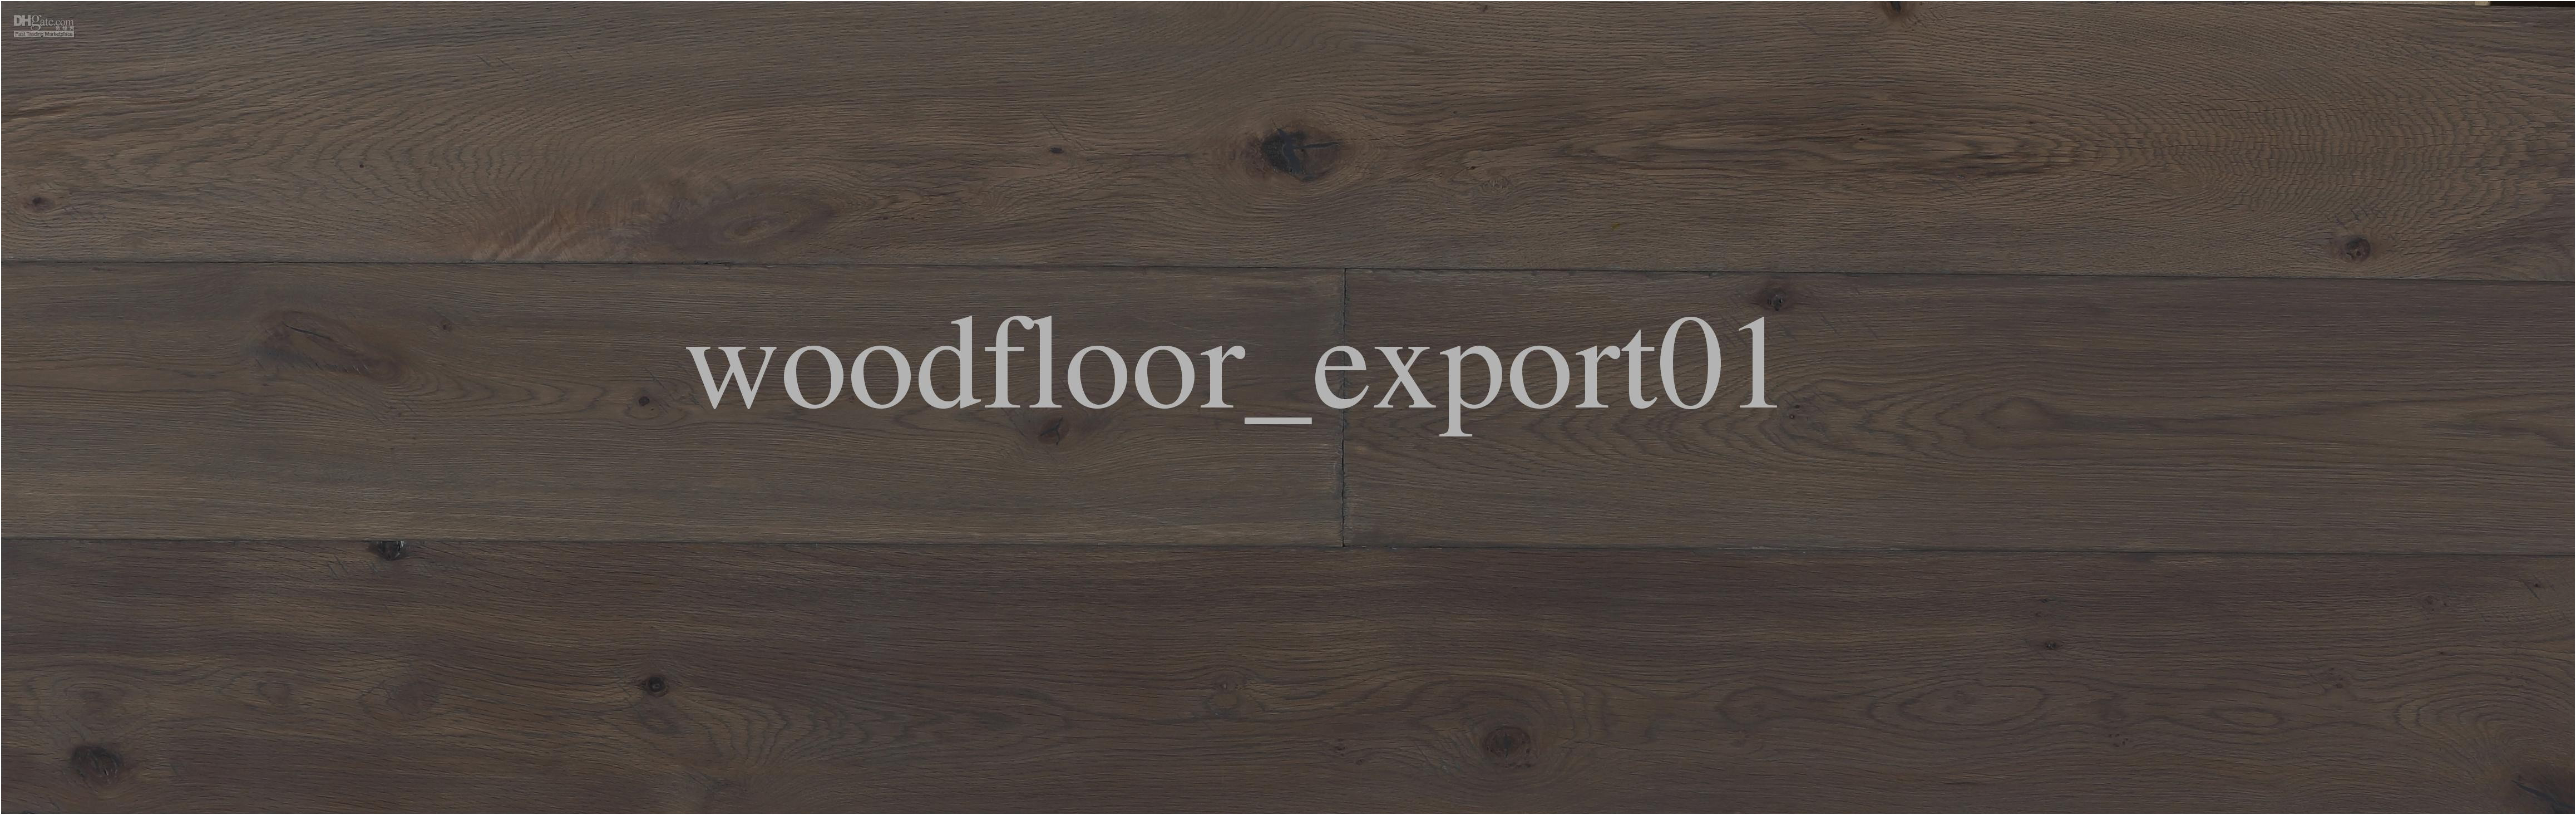 hardwood flooring saddle color of tongue and groove hardwood flooring flooring design intended for cement color oak wood flooring parquet floor antique hand drawing